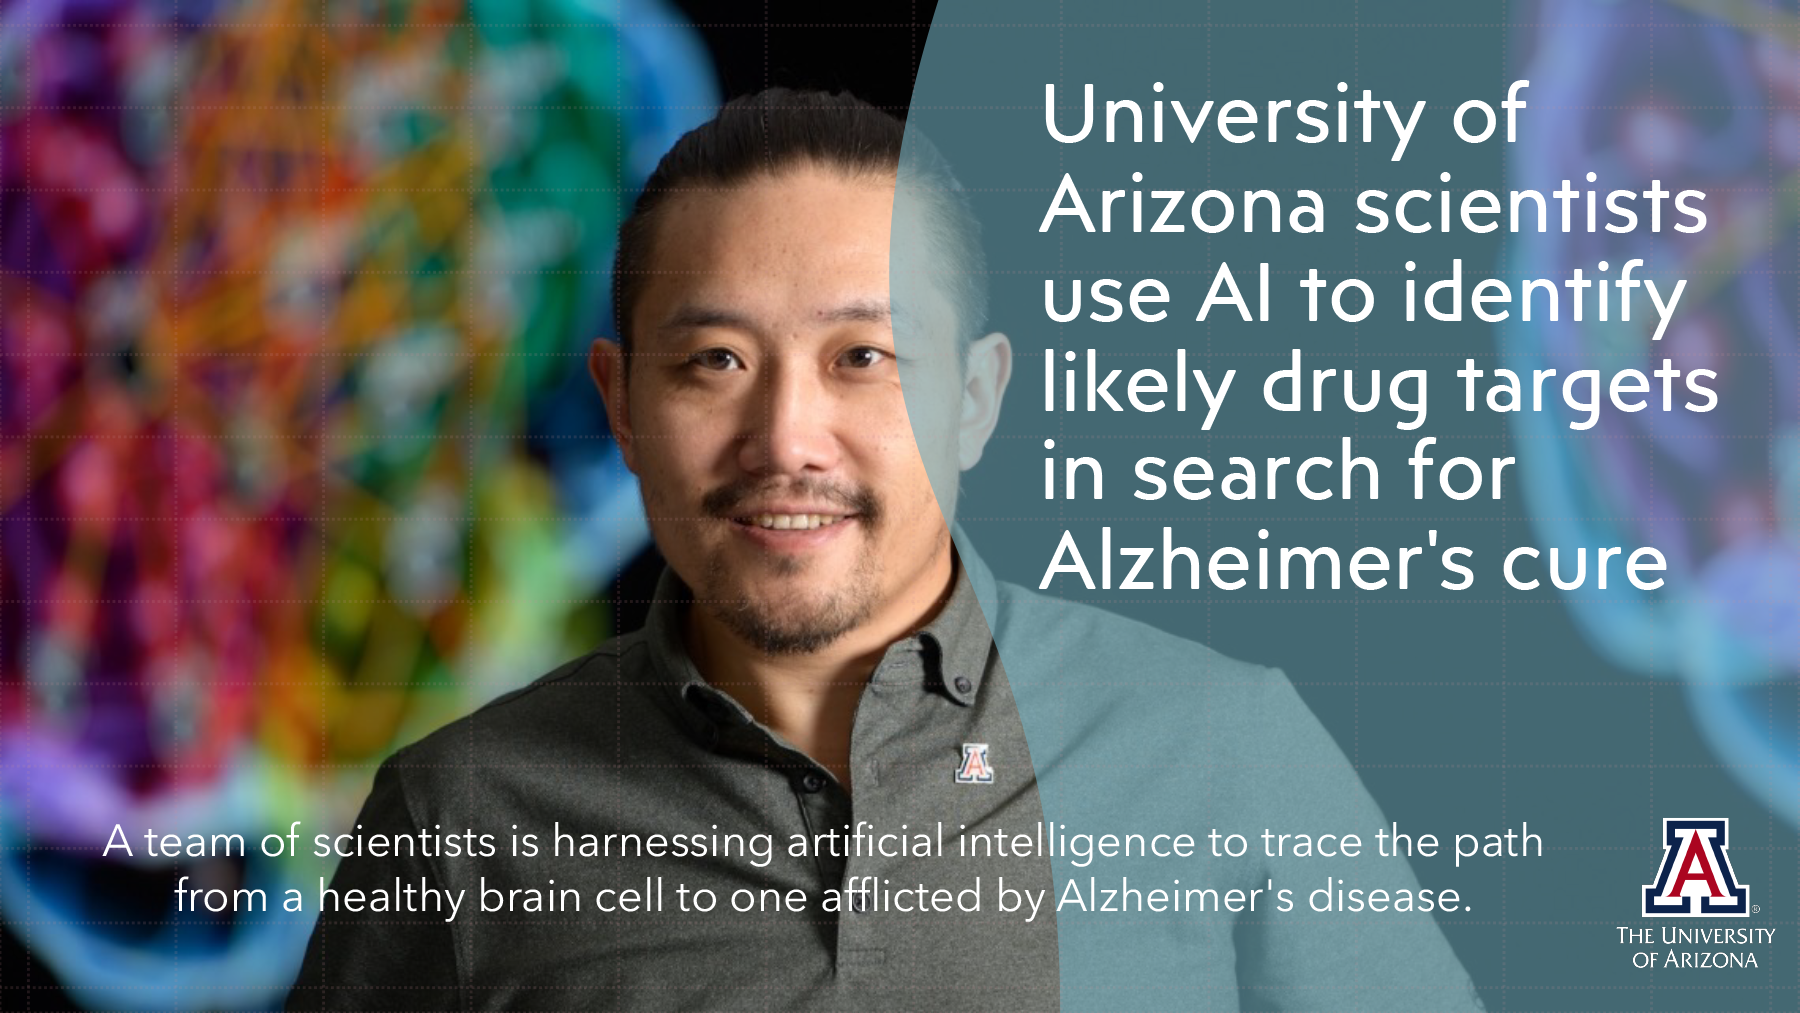 UArizona scientists use AI to identify likely drug targets in search for Alzheimer's cure